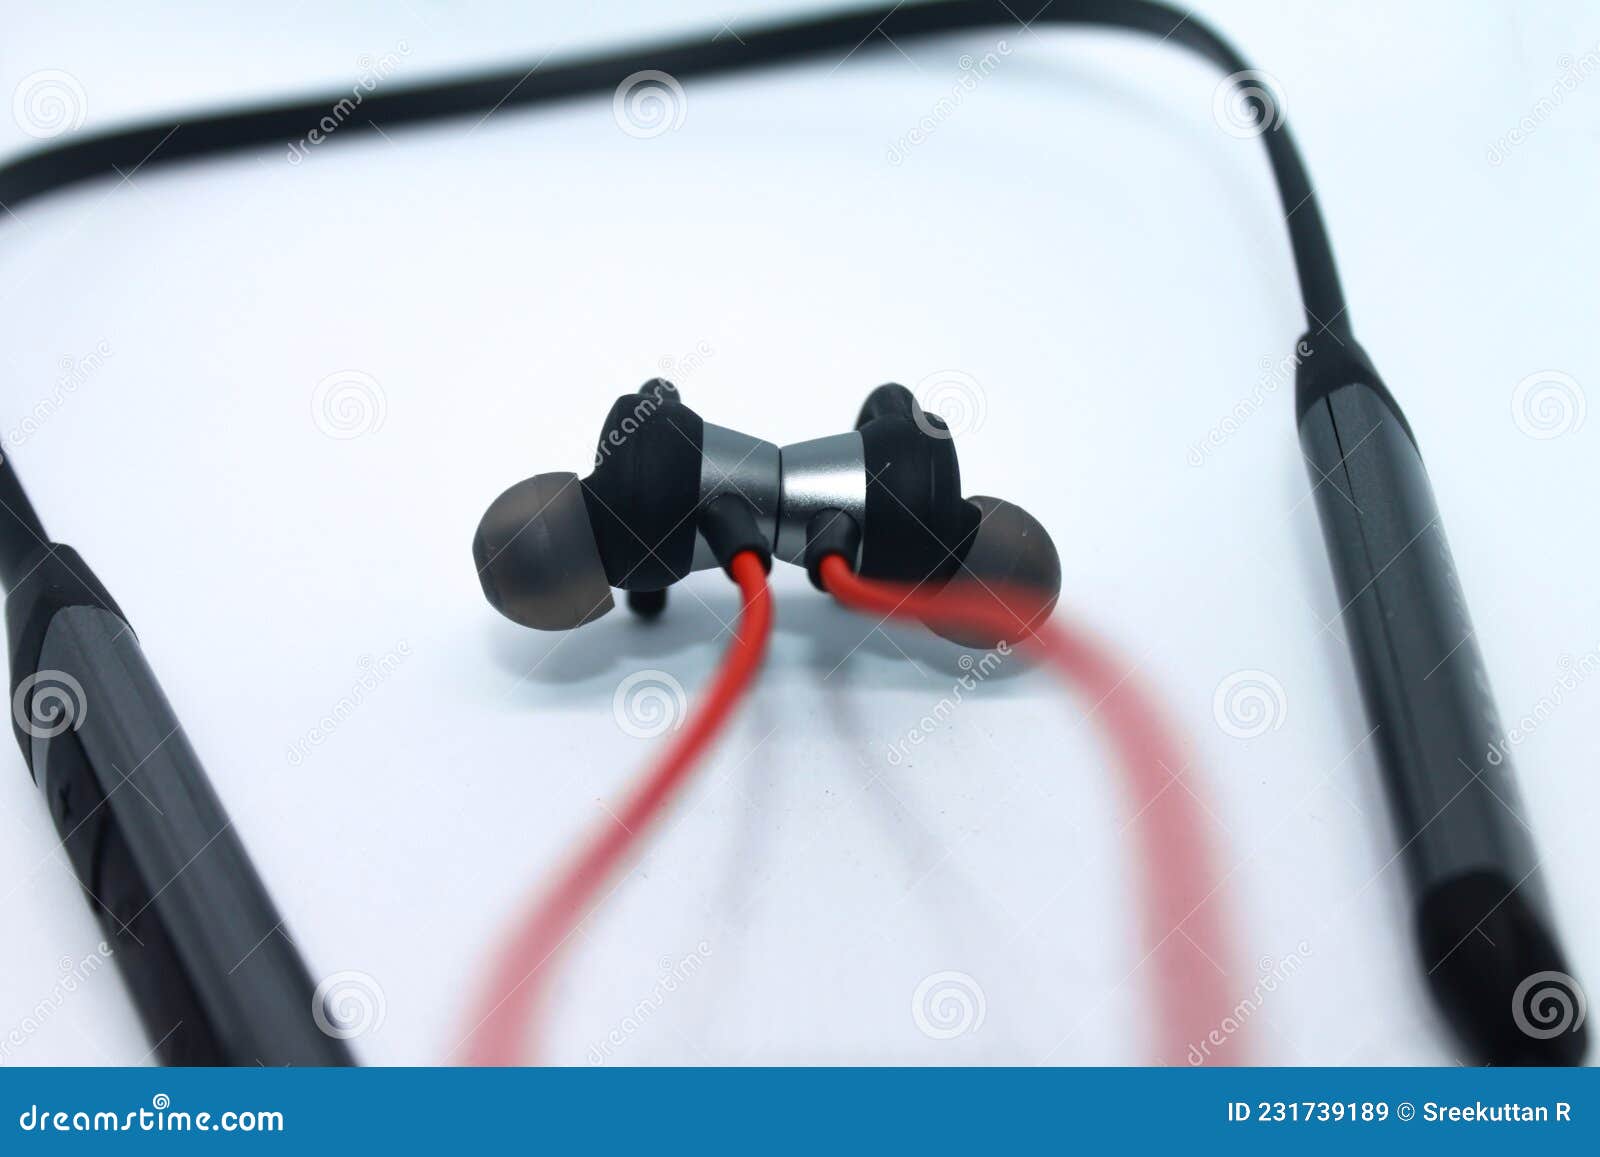 neckband image. bluetooth headset image. red wired bluetooth earphones. wireless headset